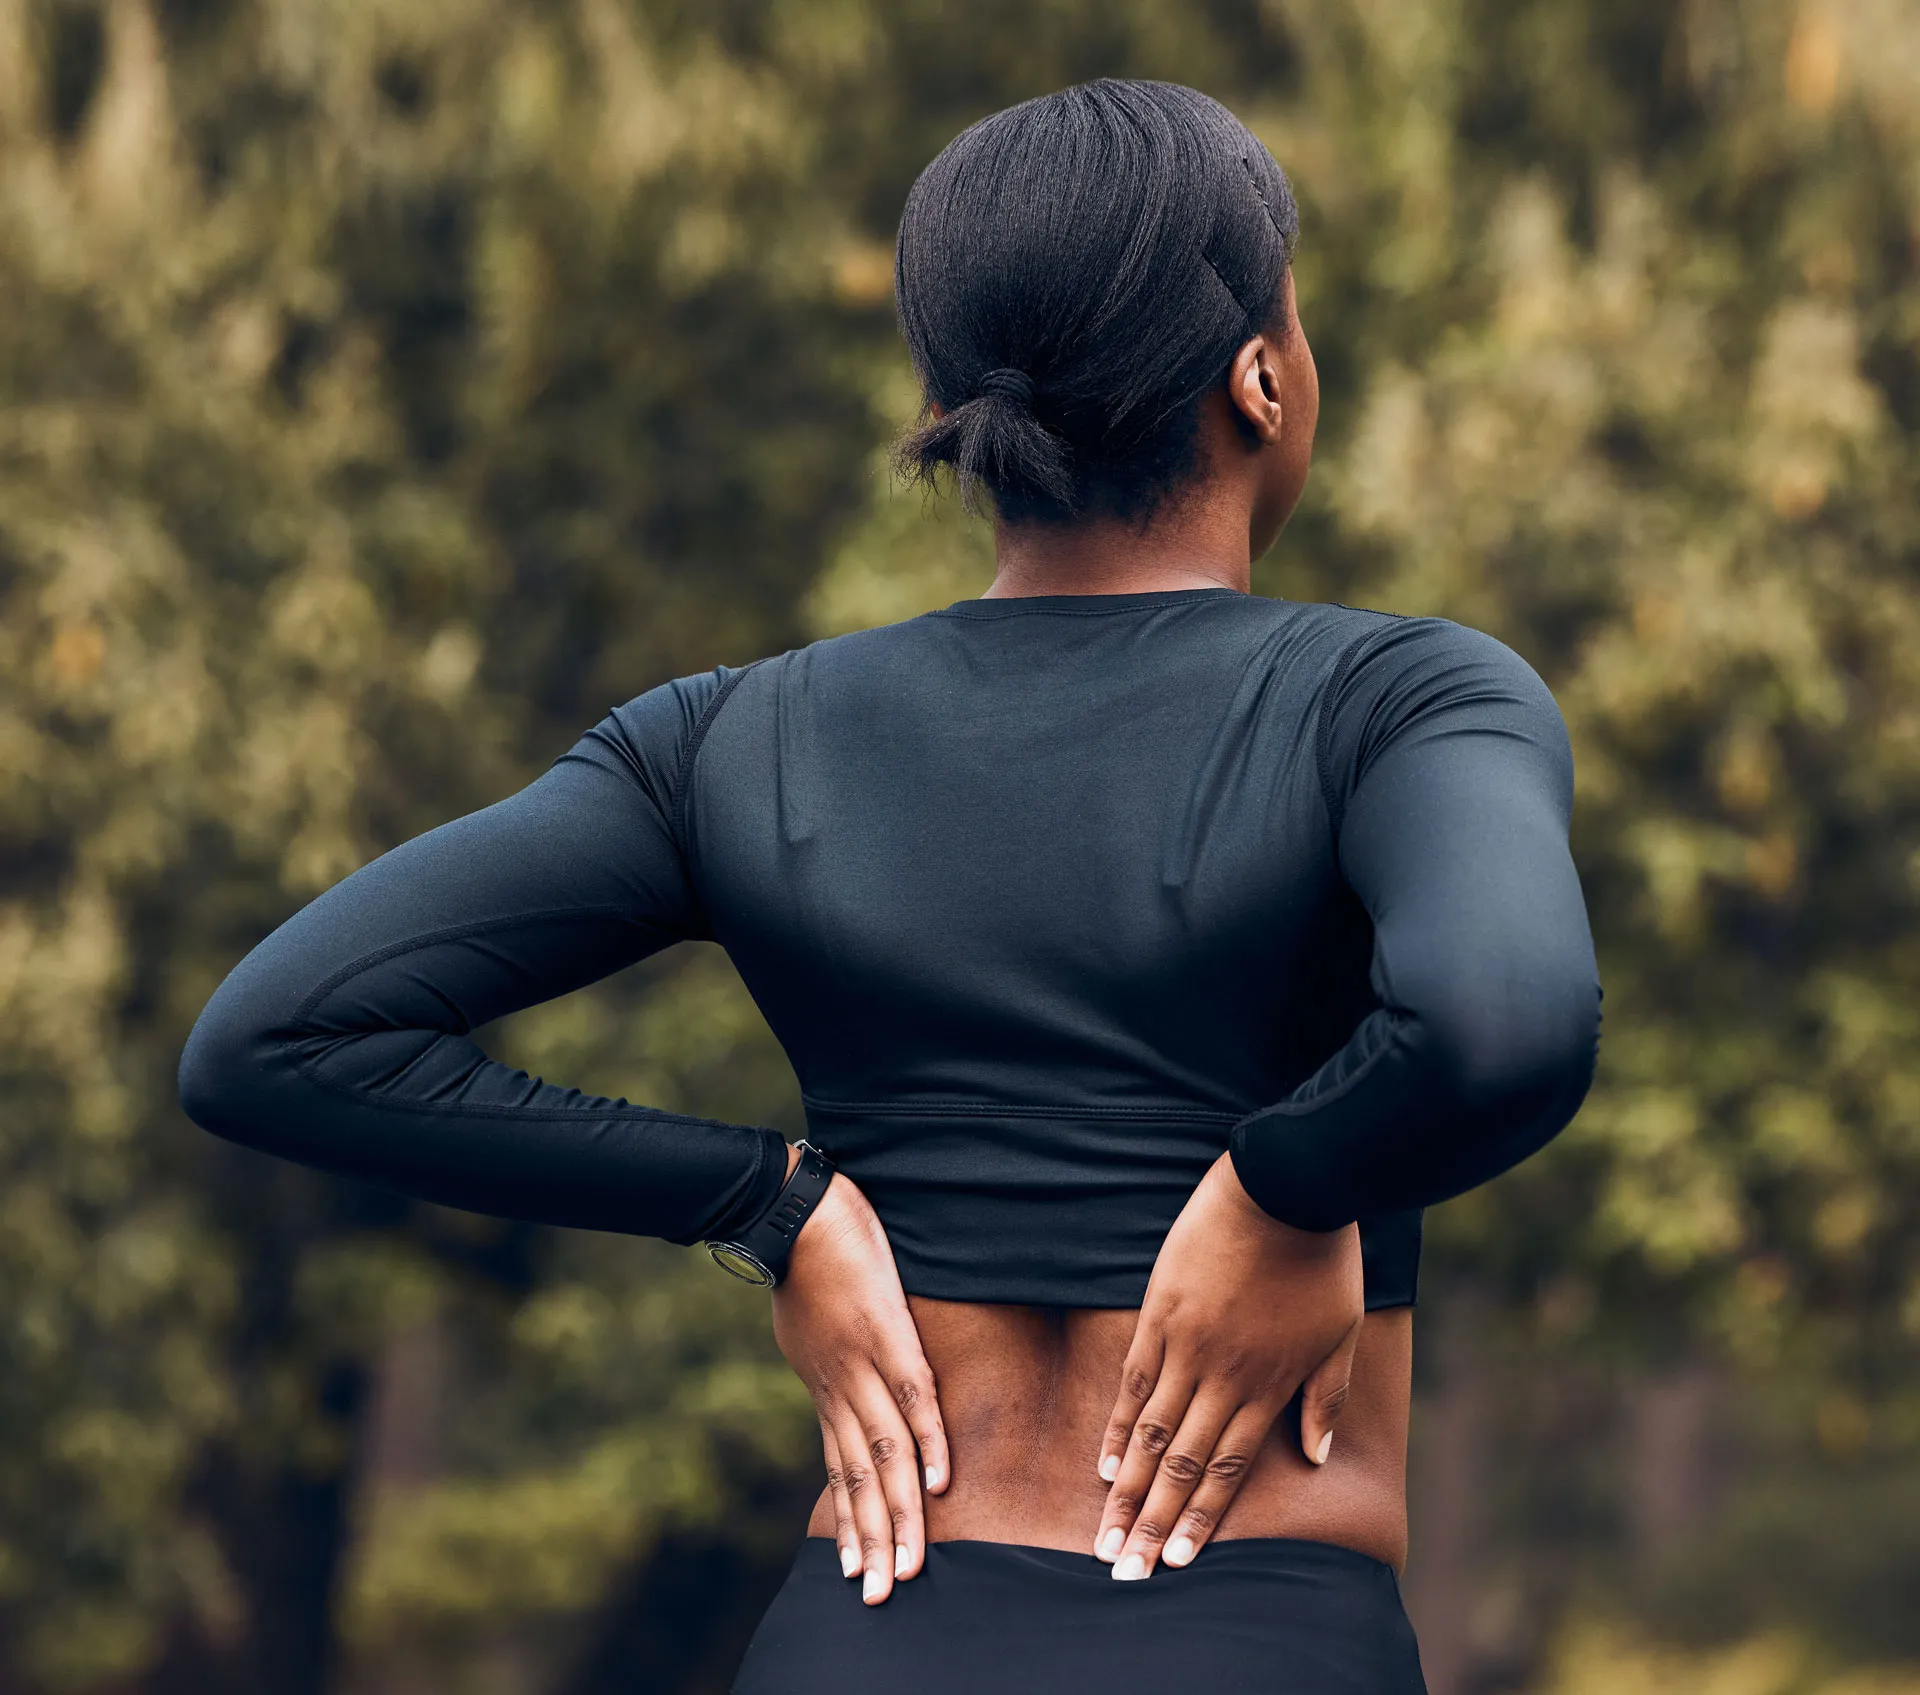 back pain fitness and sports woman outdoor for sc 2023 11 27 04 59 53 utc